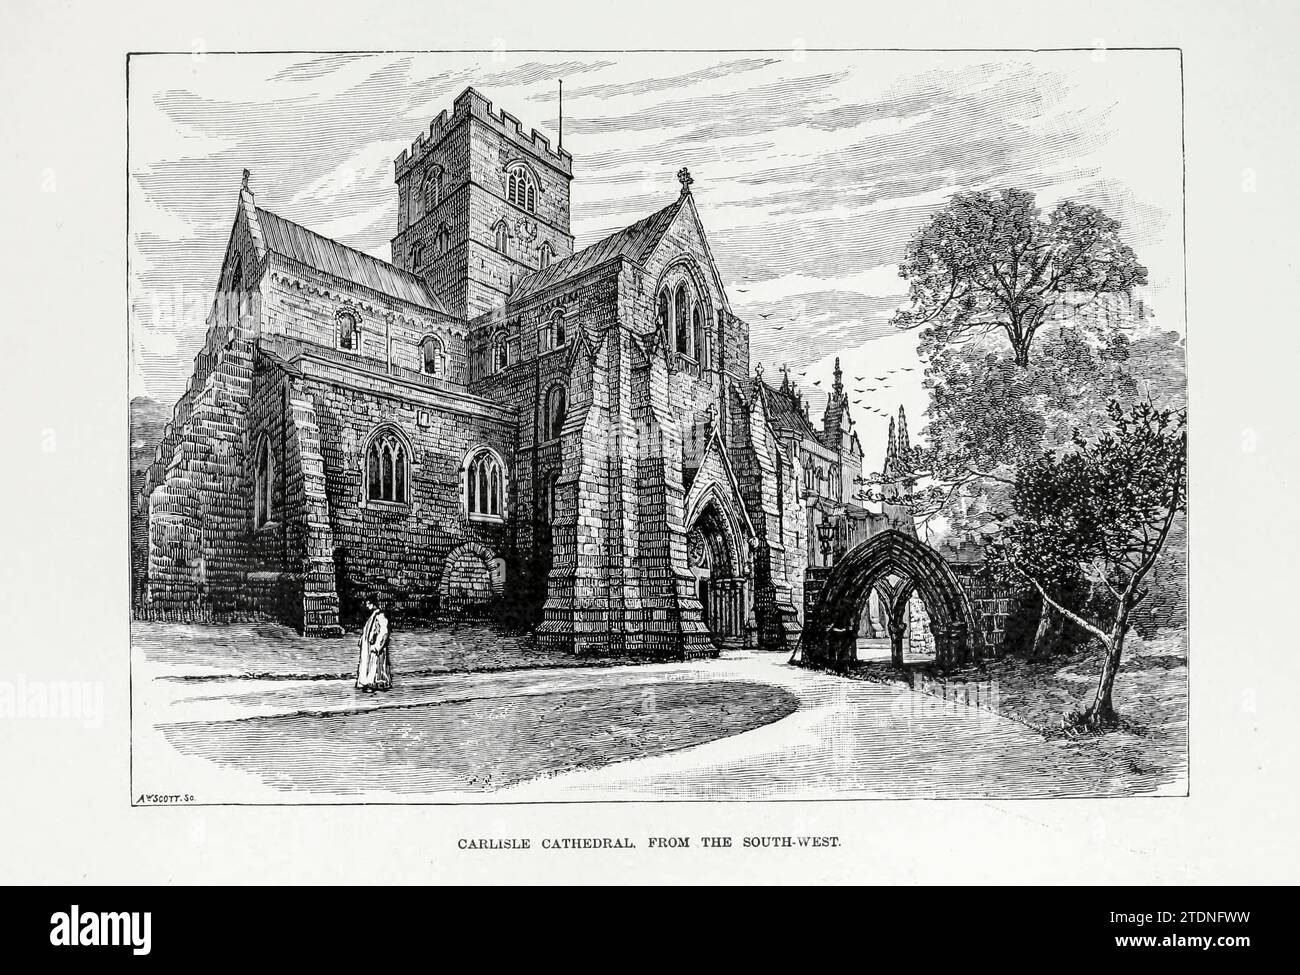 Carlisle Cathedral from the South West aus dem Buch Cathedrals, Abbeys and Church of England and Wales : Descriptive, Historical, Pictorial Band 1 von Bonney, T. G. (Thomas George), 1833-1923; Publisher London : Cassell 1890 Stockfoto